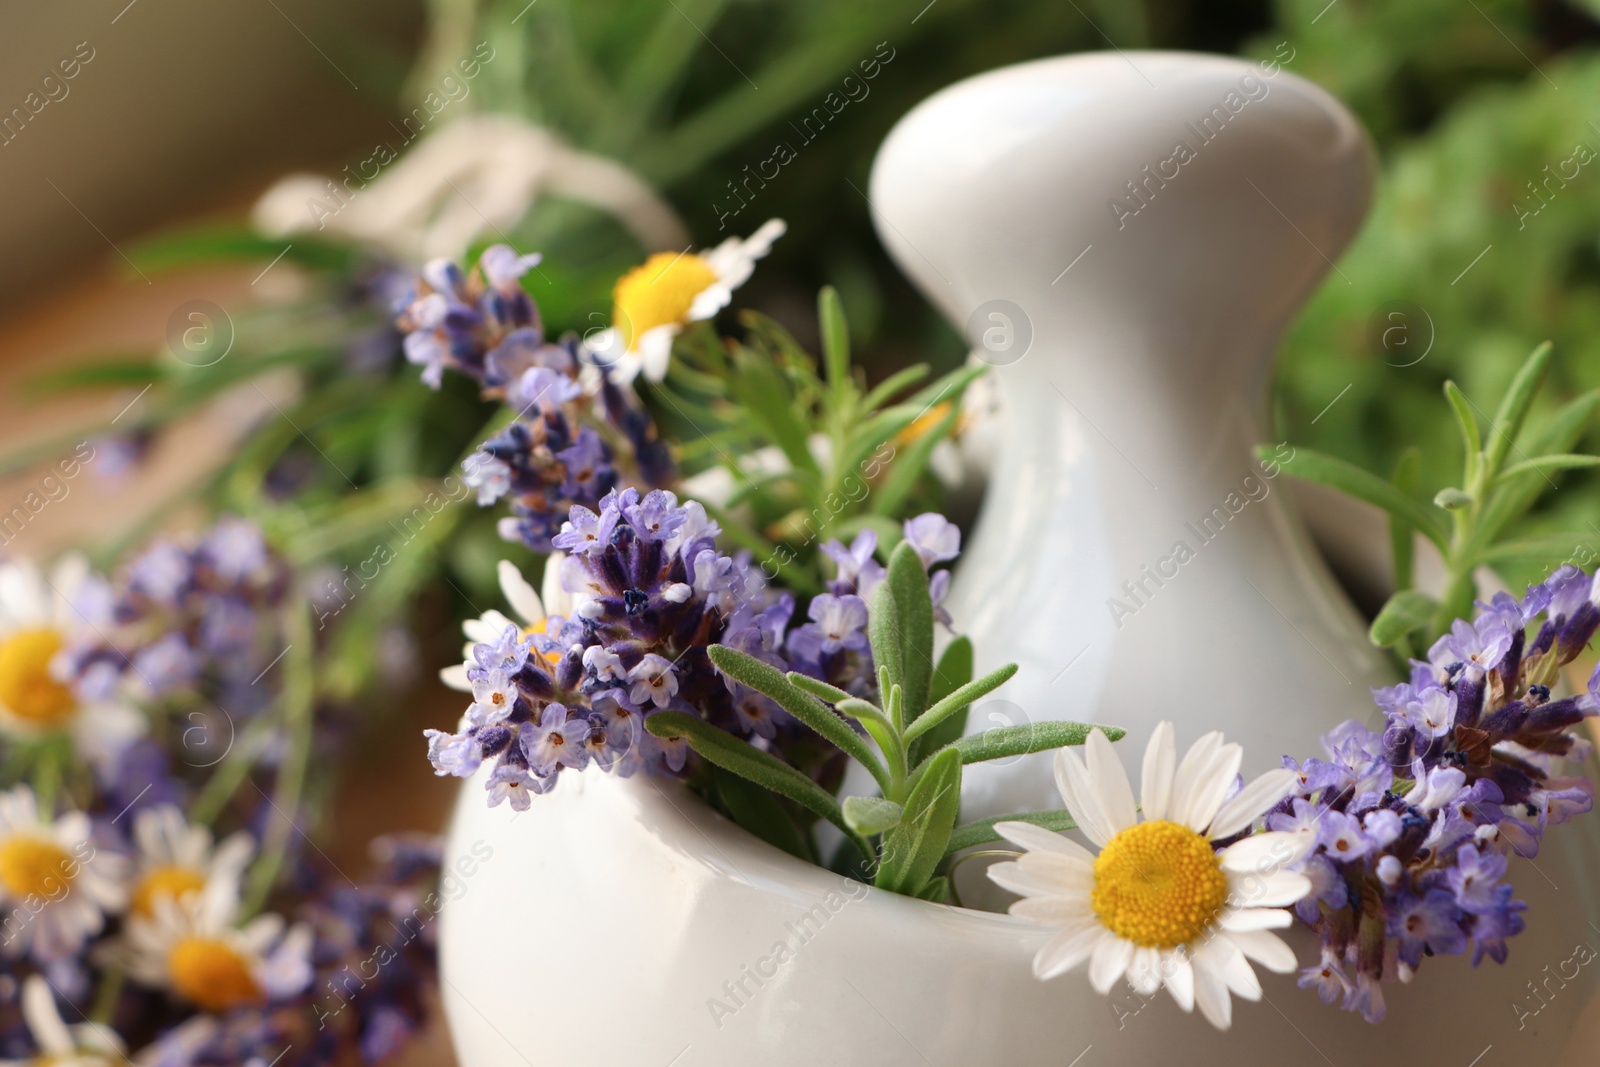 Photo of Mortar with fresh lavender, chamomile flowers, rosemary and pestle on blurred background, closeup